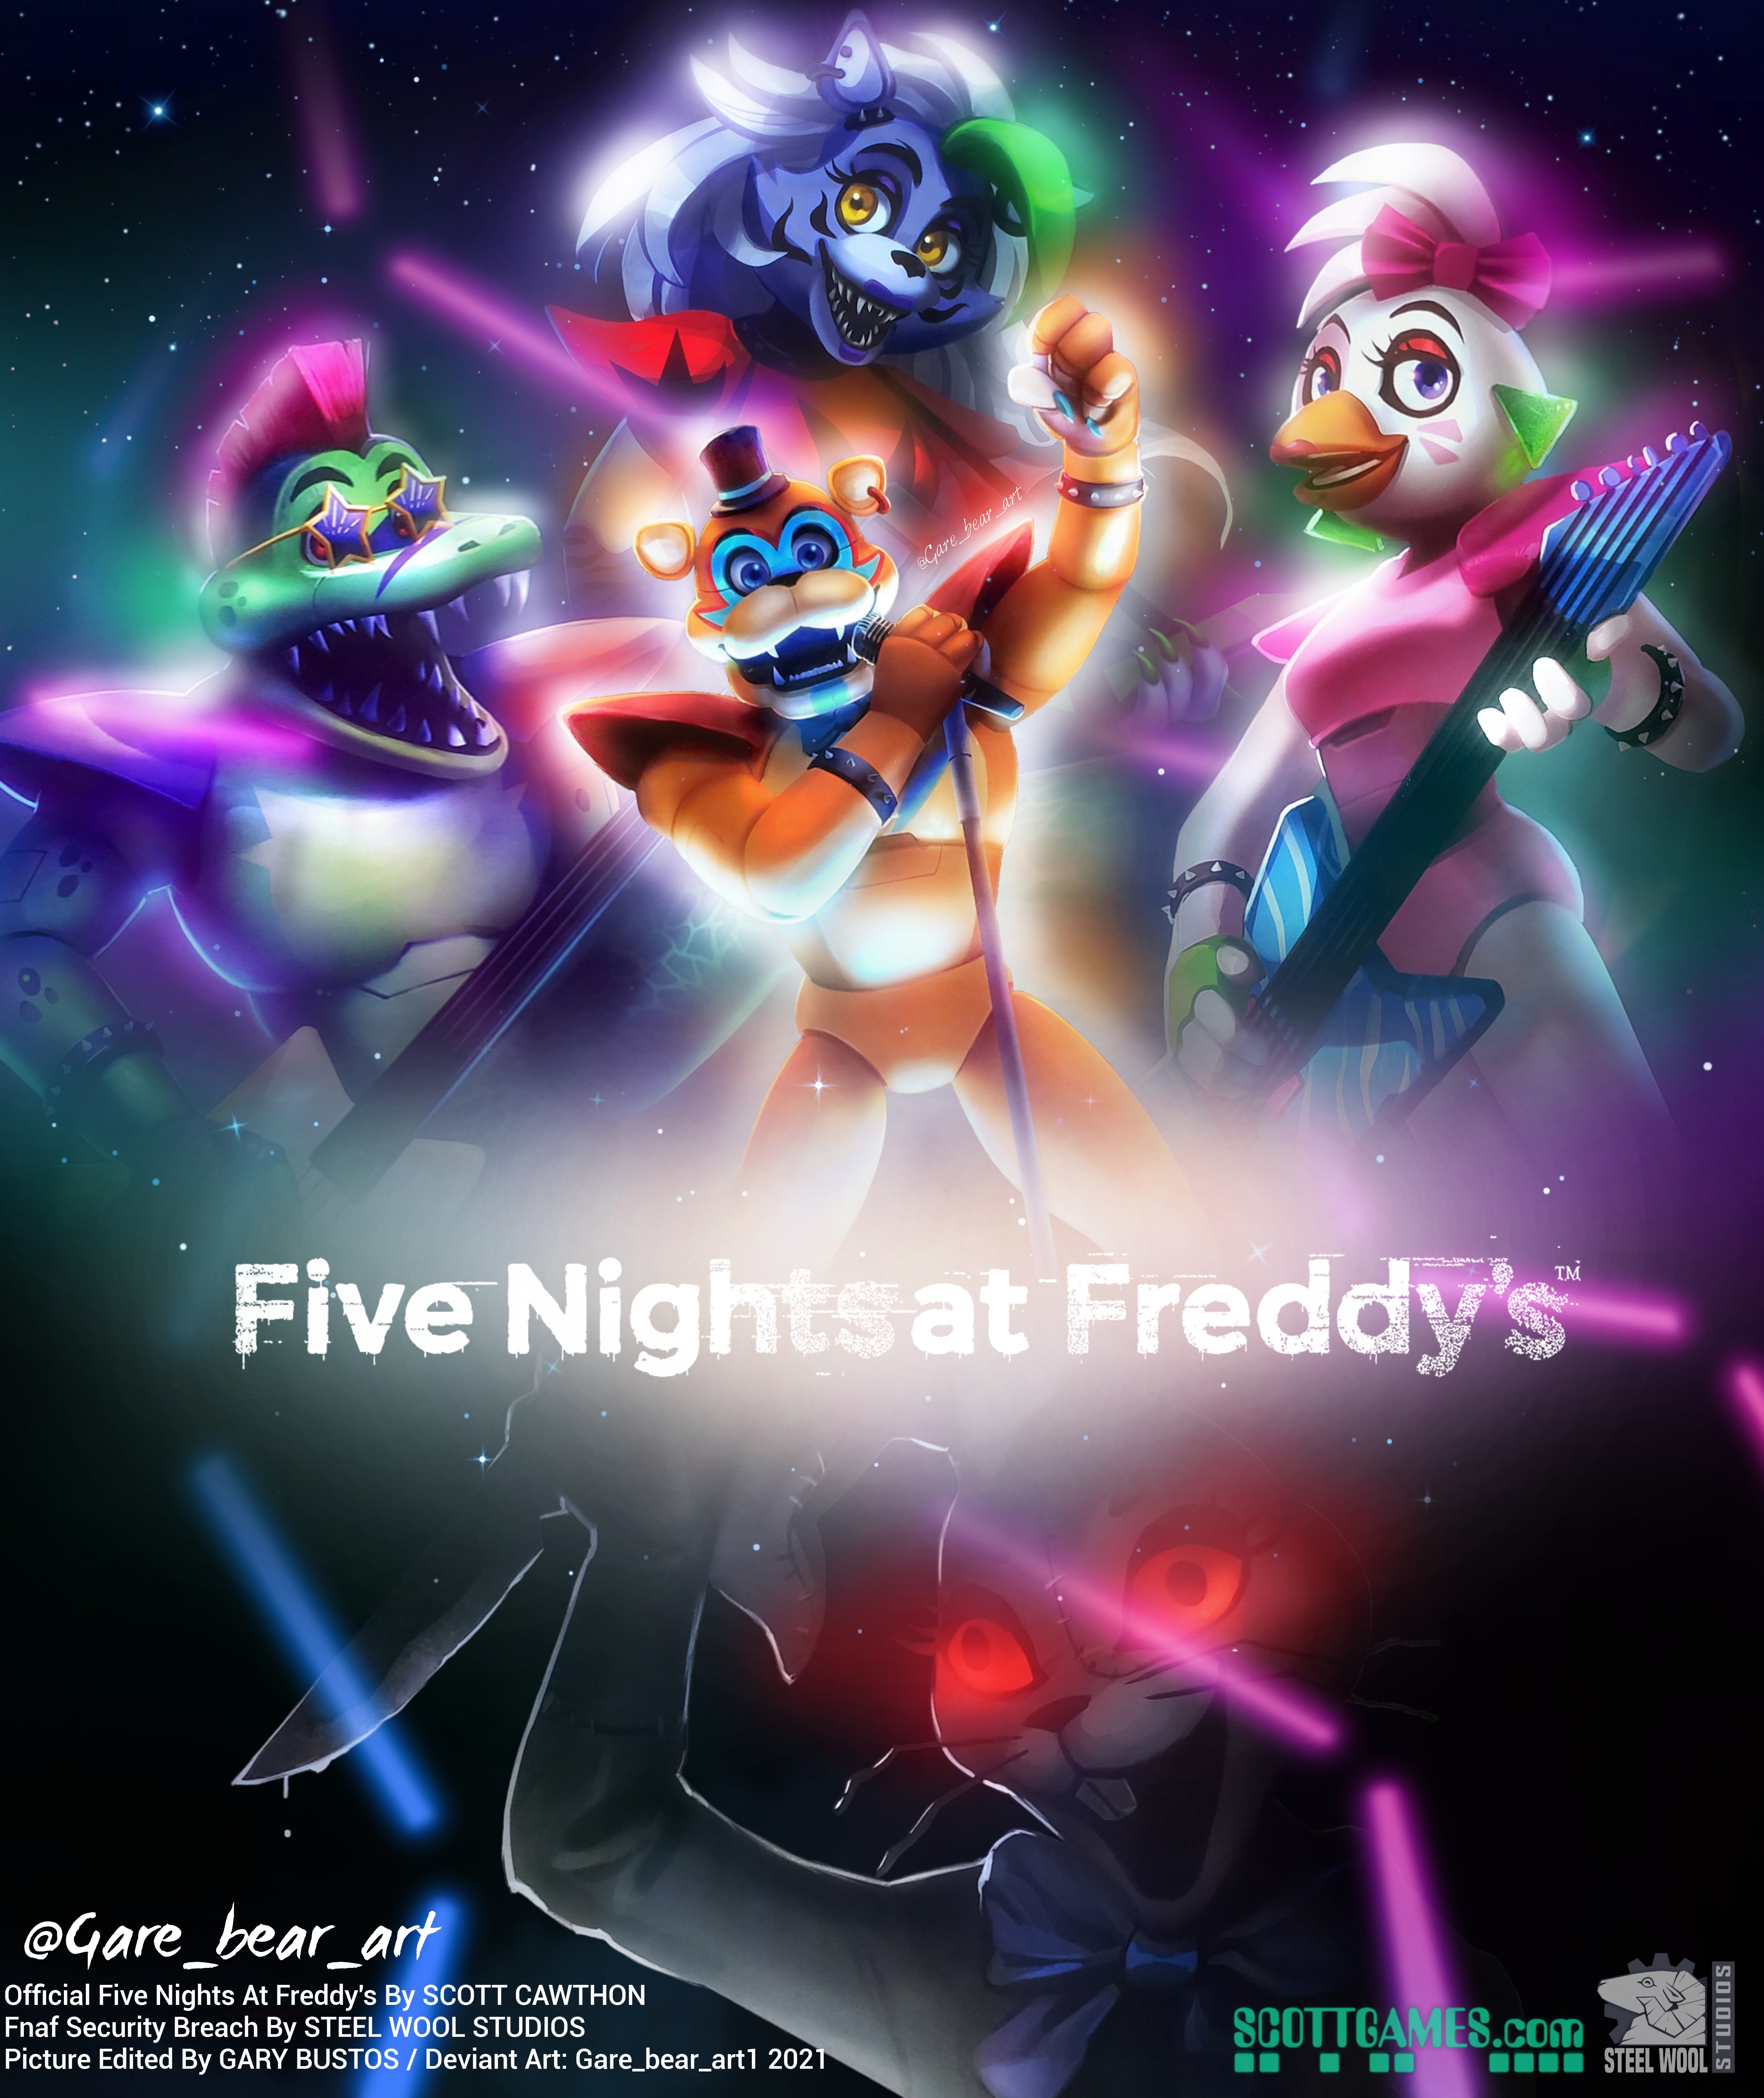 20+ Five Nights at Freddy's: Security Breach HD Wallpapers and Backgrounds